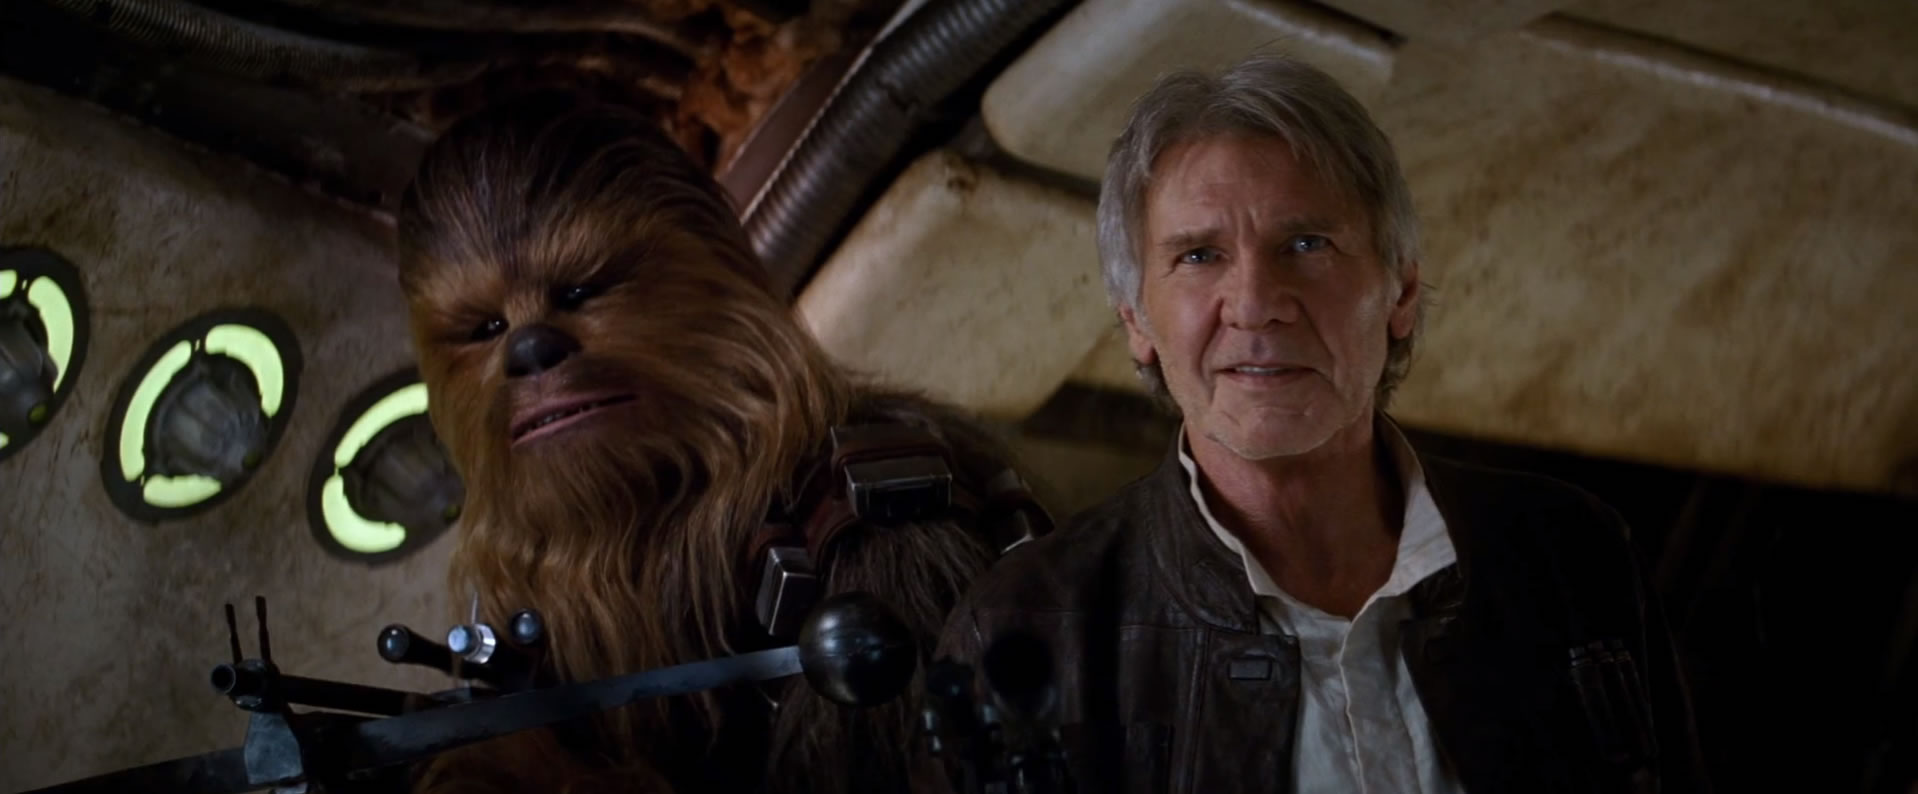 Star Wars: The Force Awakens Promo Art Reveals All Of Han Solo's New Look